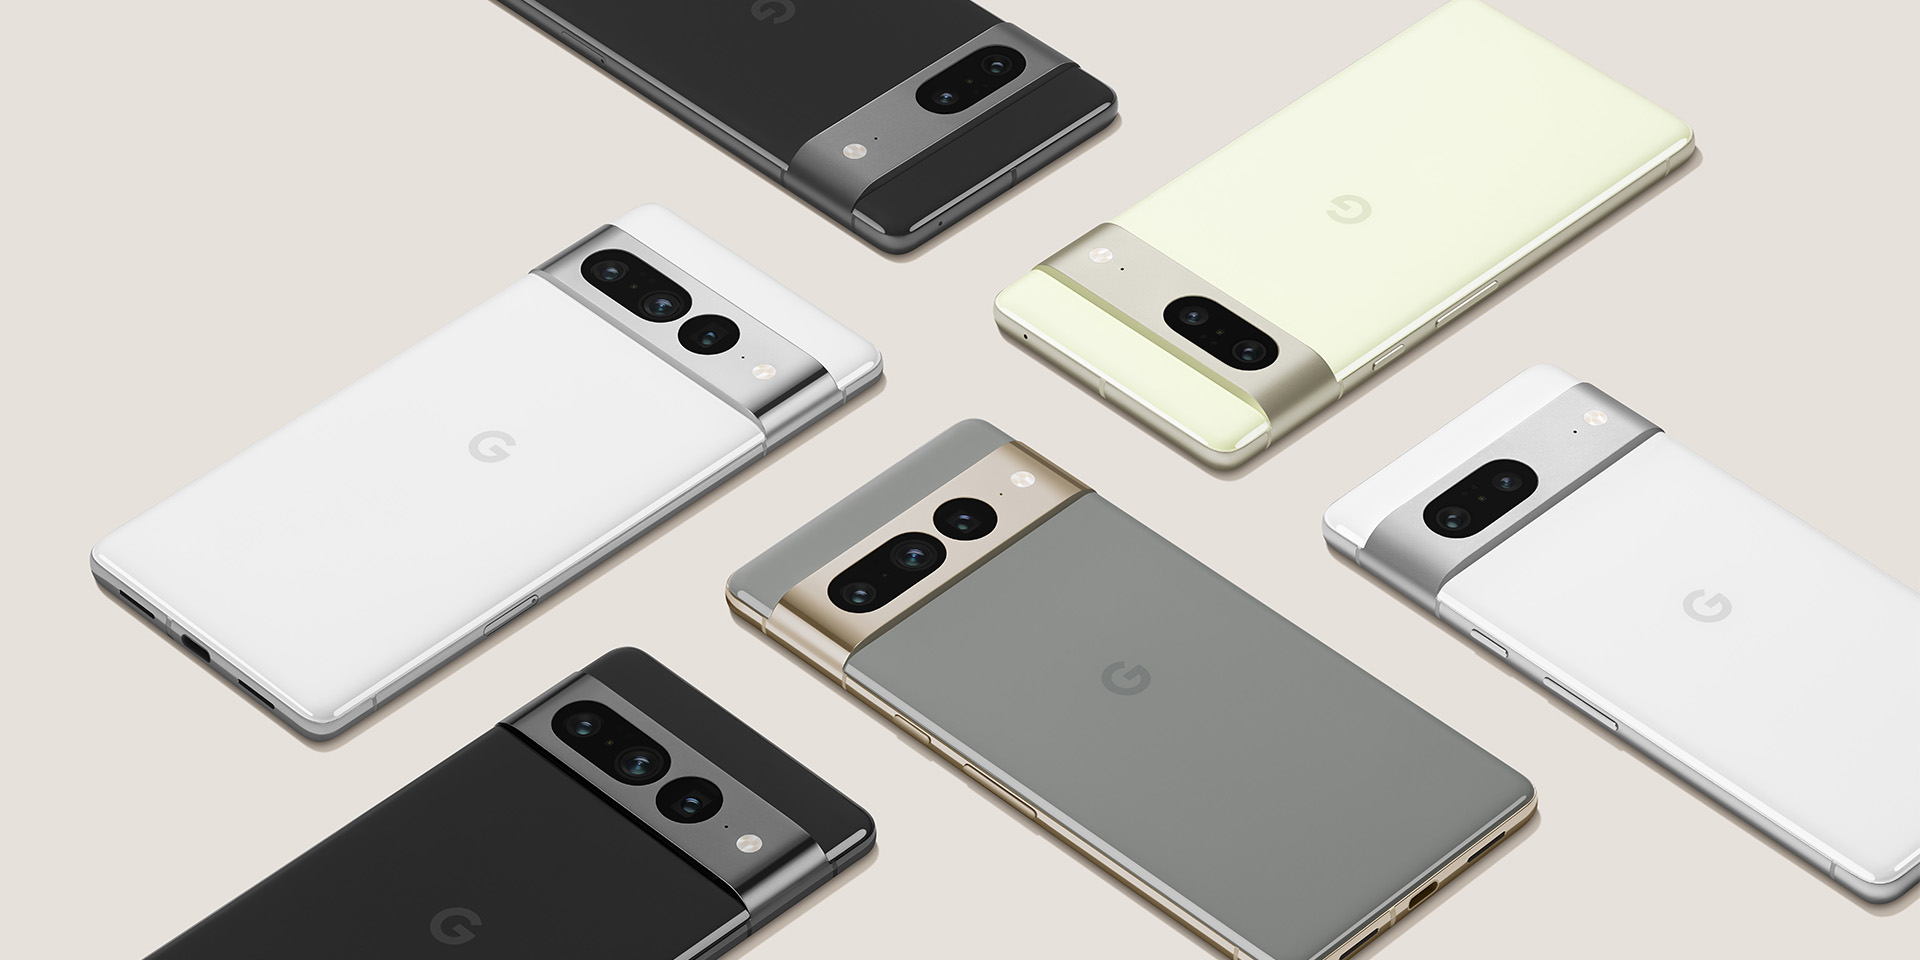 Google Pixel 7 announced at I/O 2022, coming this Fall - 9to5Google